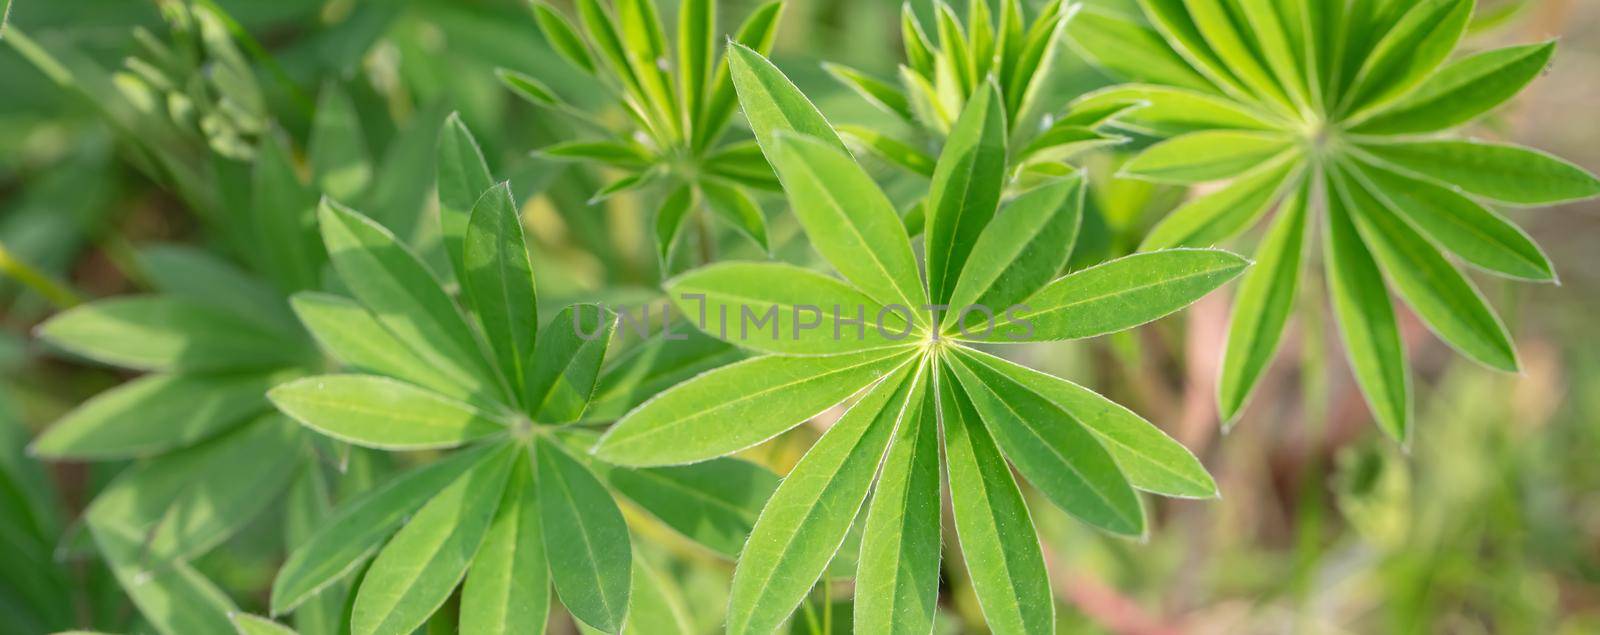 Beautiful green leafed plants. Banner green floral background.